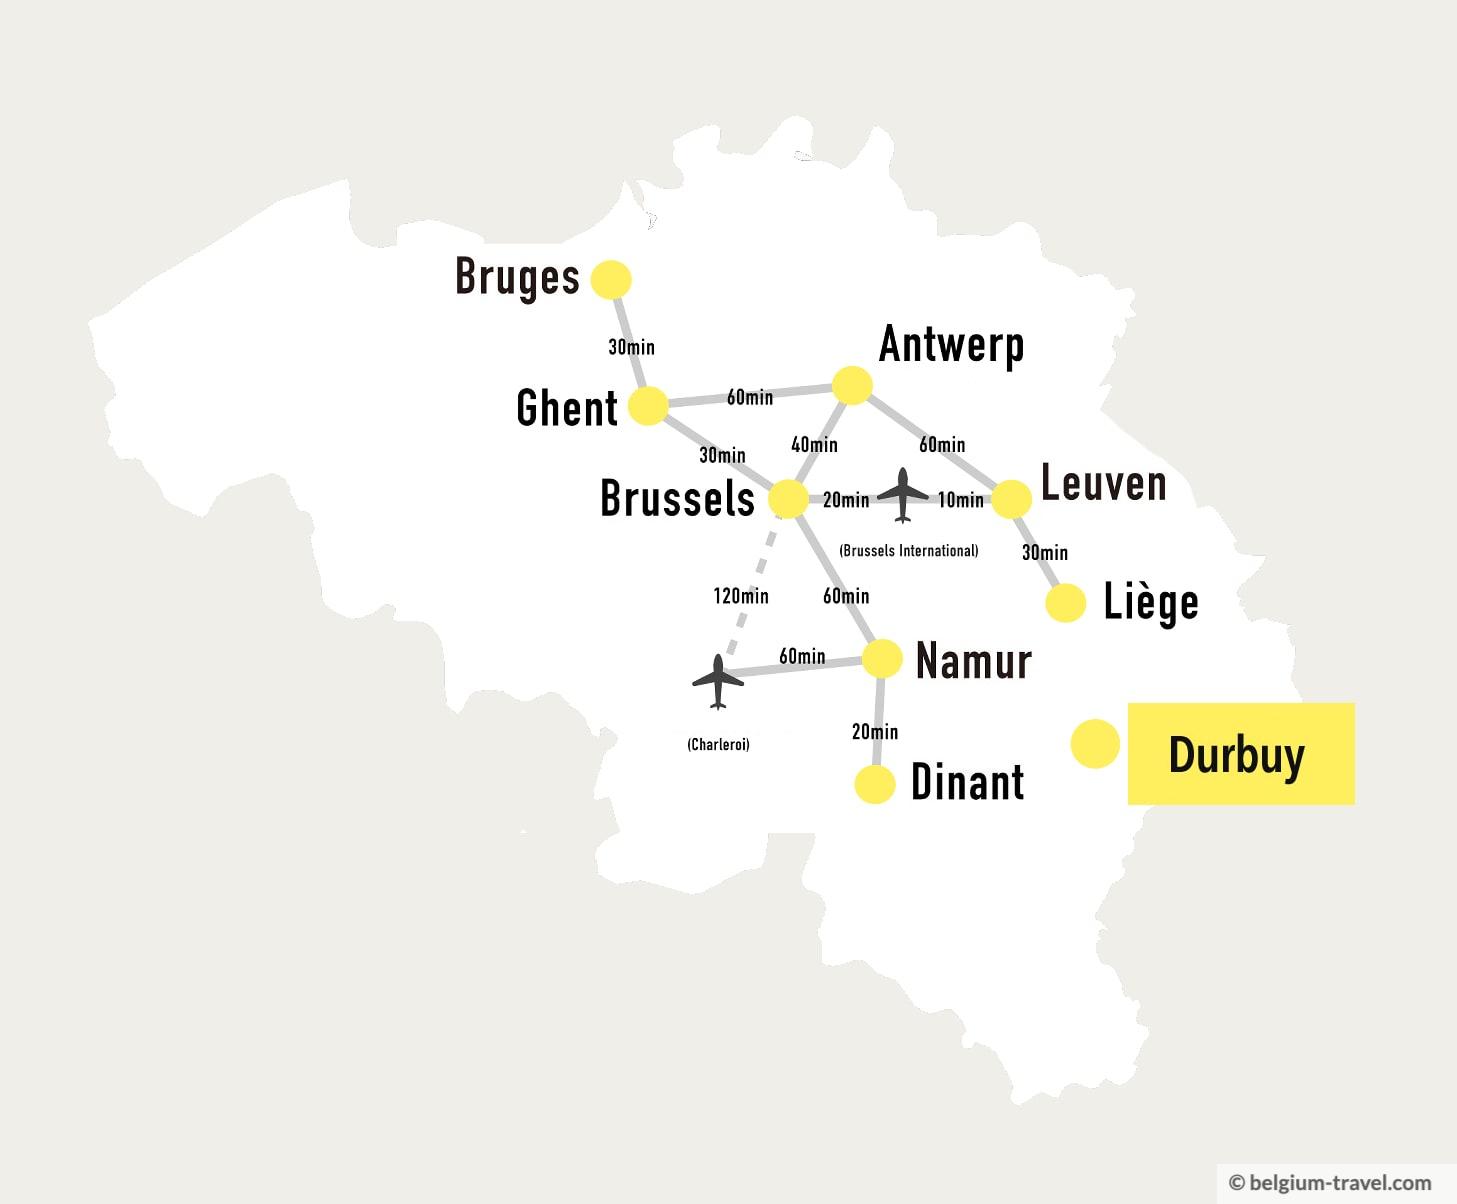 How to get to Durbuy from other cities in Belgium